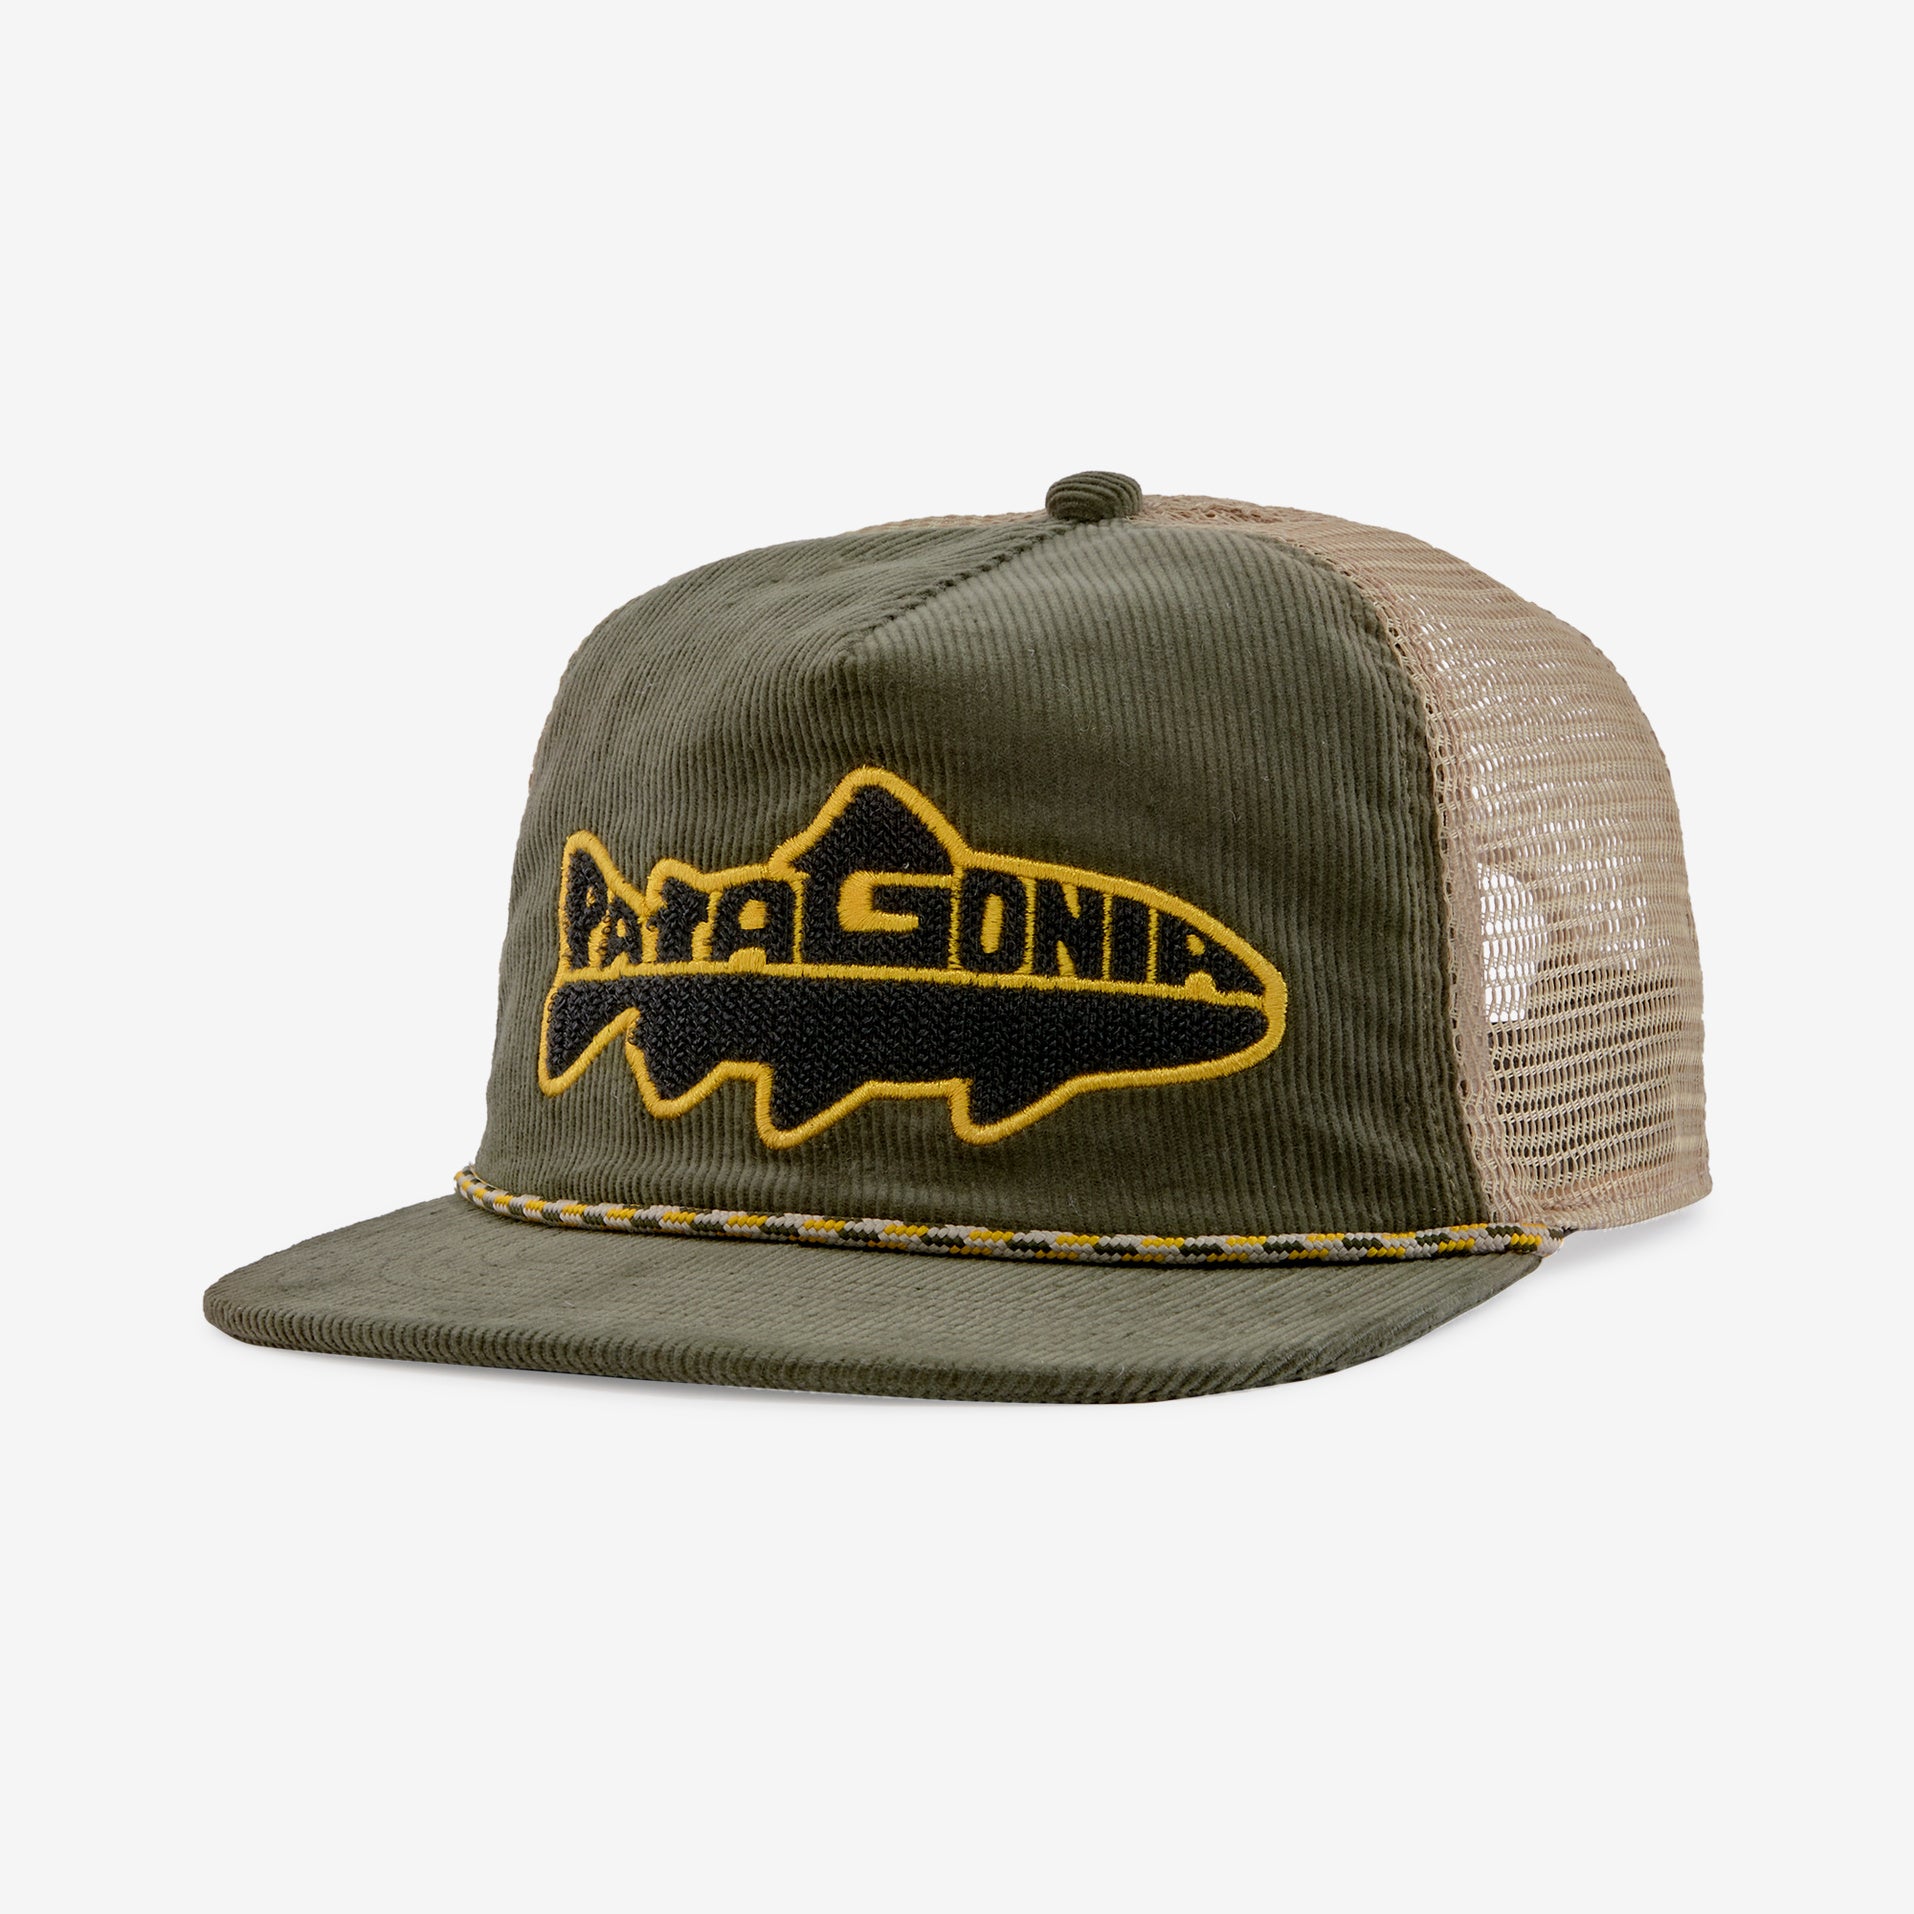 Patagonia Fly Catcher Hat (Sale)